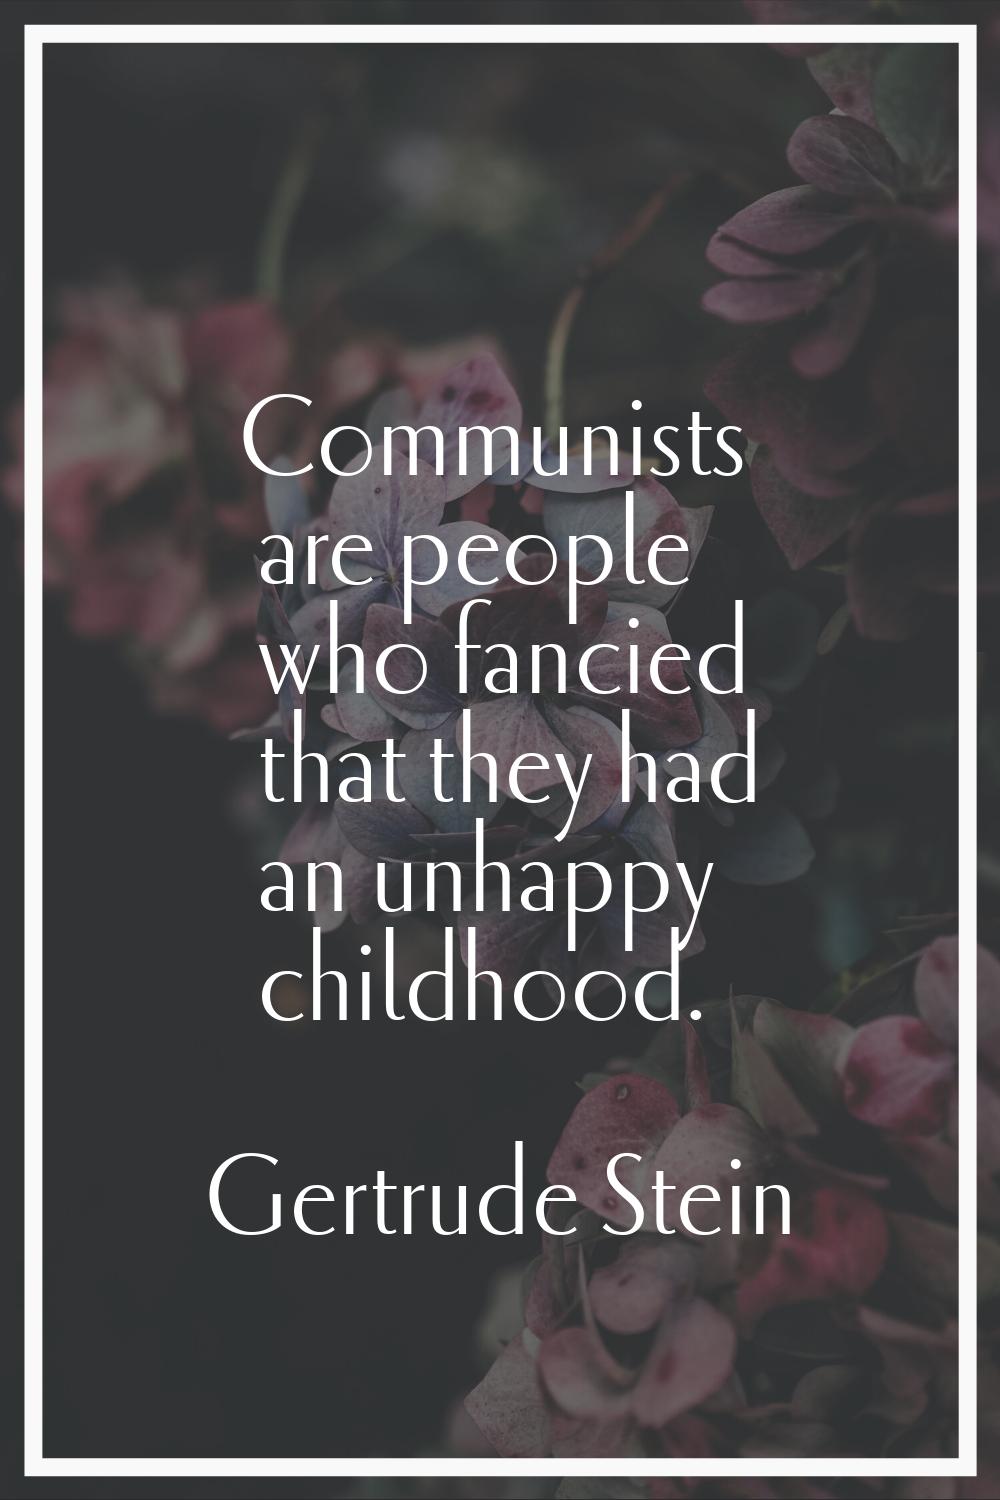 Communists are people who fancied that they had an unhappy childhood.